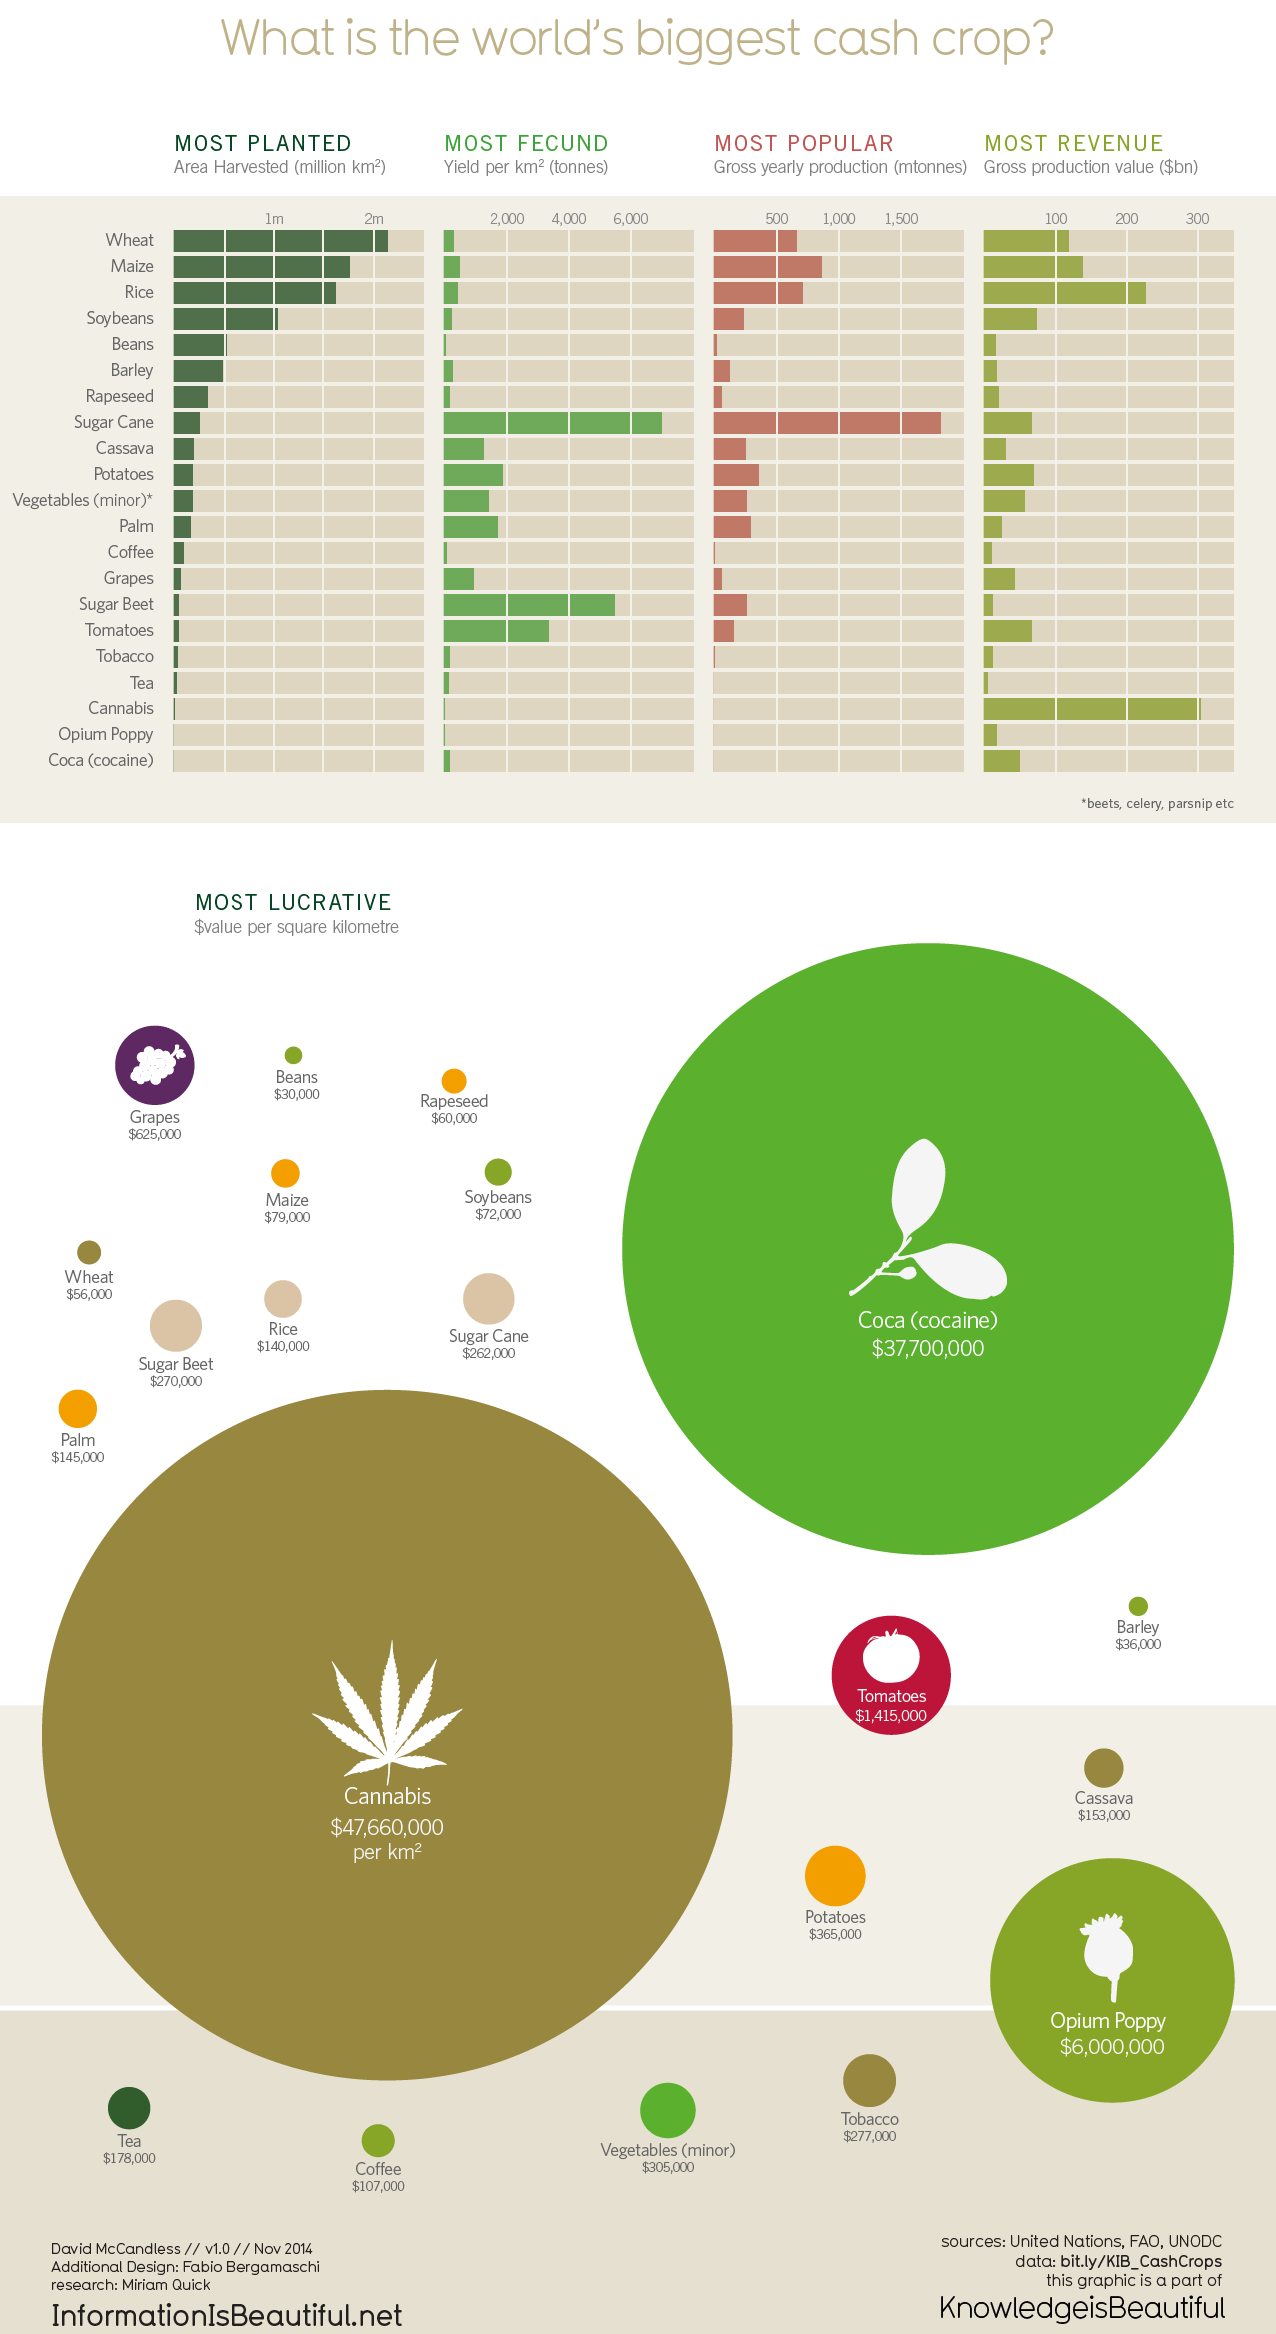 What Are the Top 5 Cash Crops in the World?